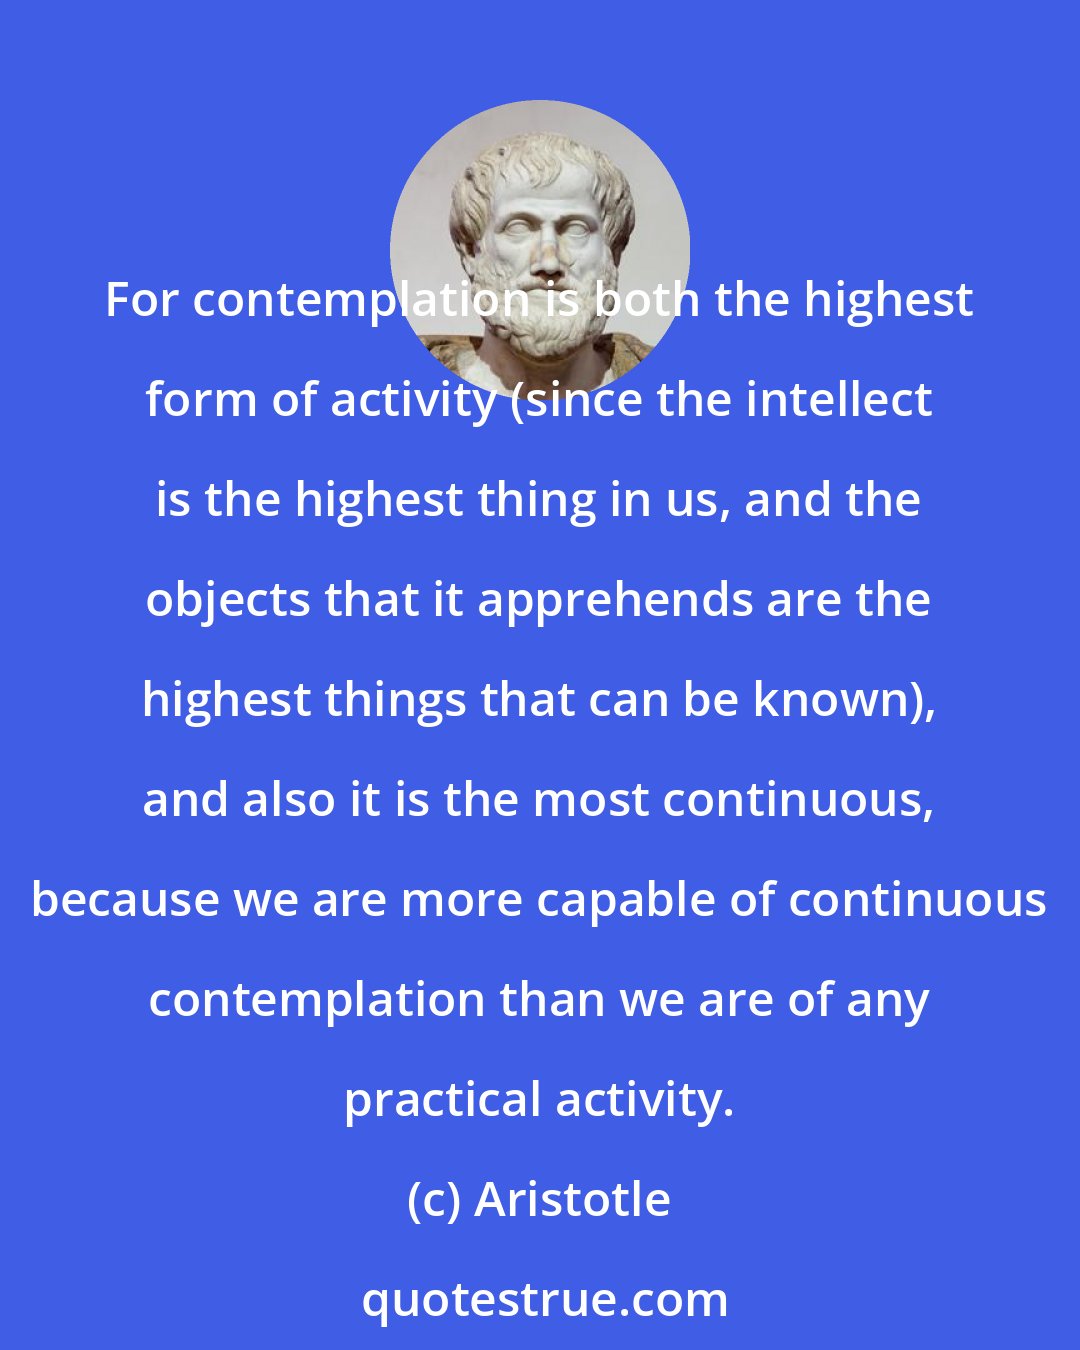 Aristotle: For contemplation is both the highest form of activity (since the intellect is the highest thing in us, and the objects that it apprehends are the highest things that can be known), and also it is the most continuous, because we are more capable of continuous contemplation than we are of any practical activity.